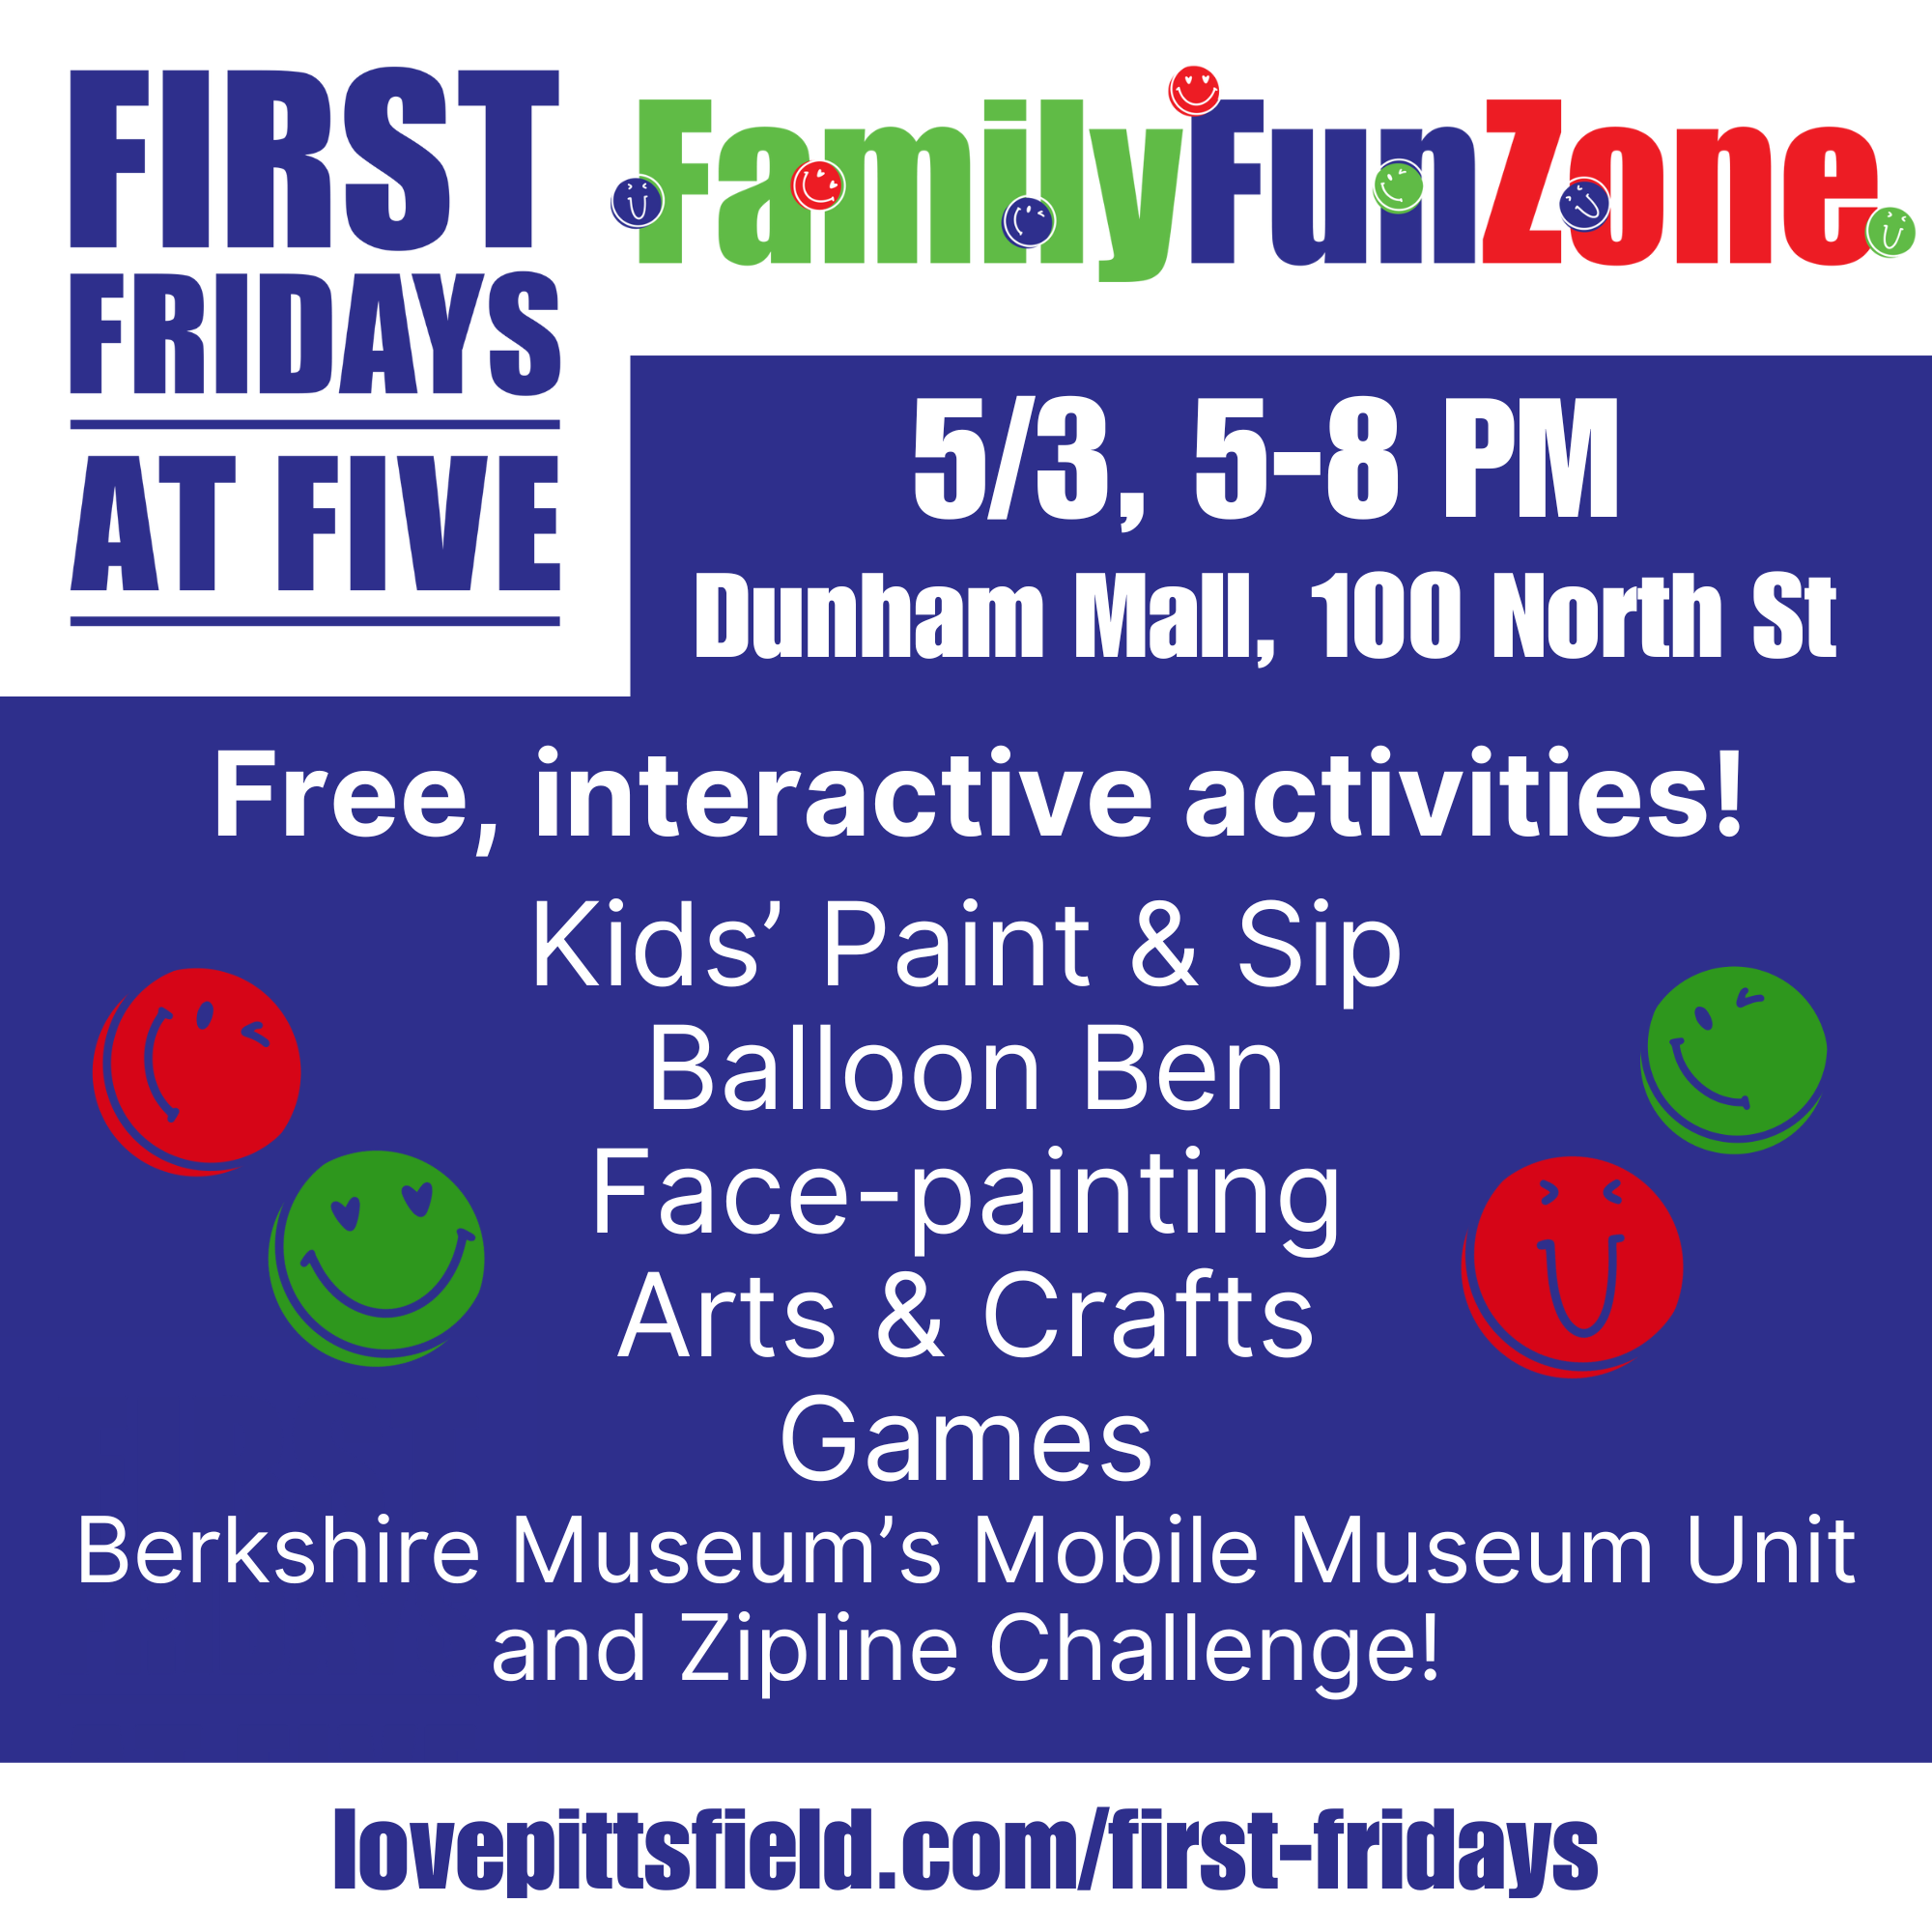 Family Fun Zone at First Fridays at Five